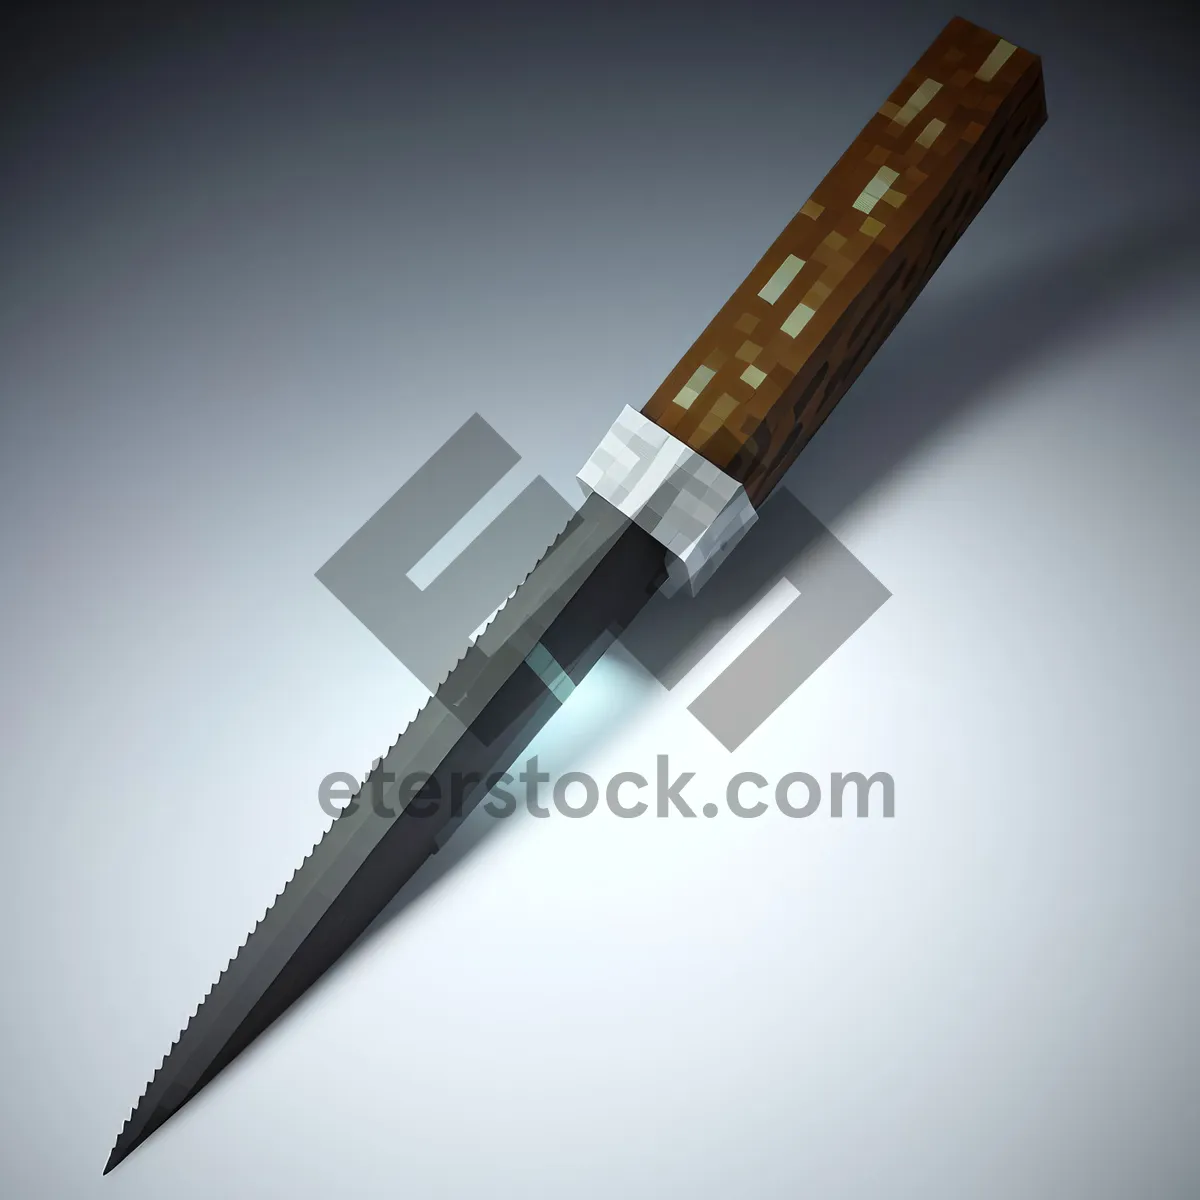 Picture of Sharp Writing Tools for Business and School